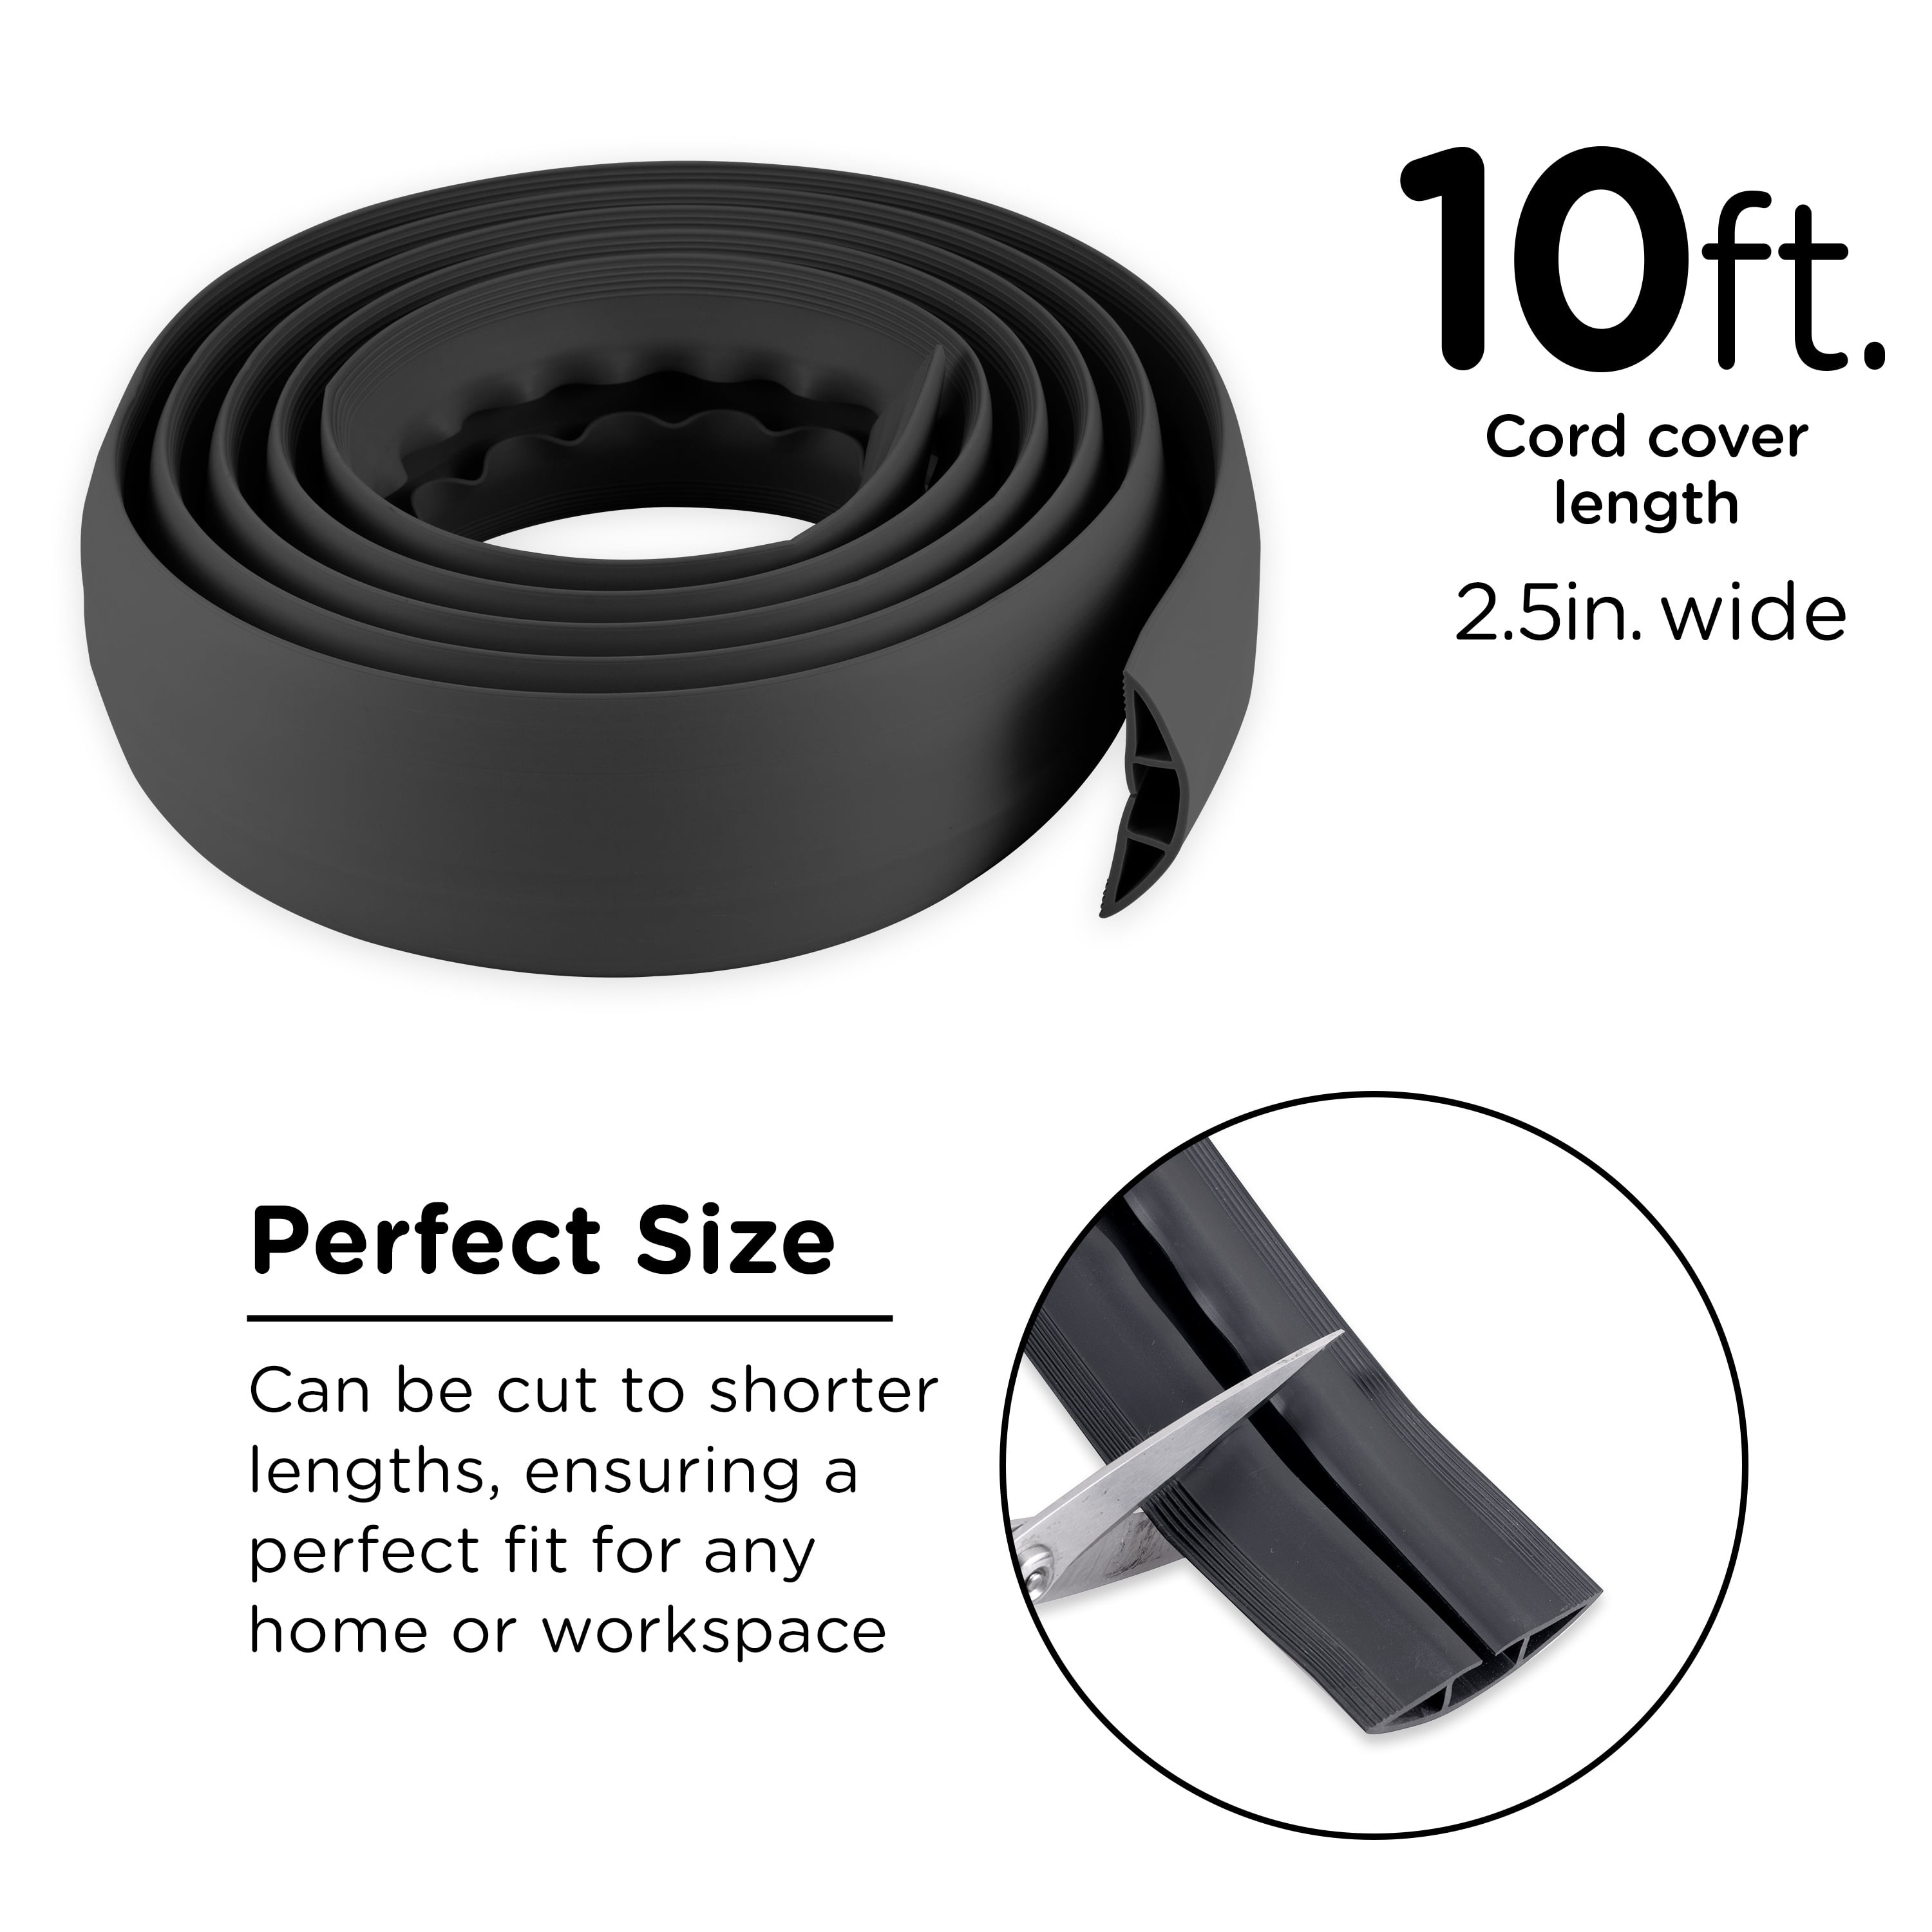 Rubber Bond Cord Cover Floor Cable Protector - Strong Self Adhesive Floor Cord Covers for Wires - Low Profile Extension Cord Covers for Floor & Wall